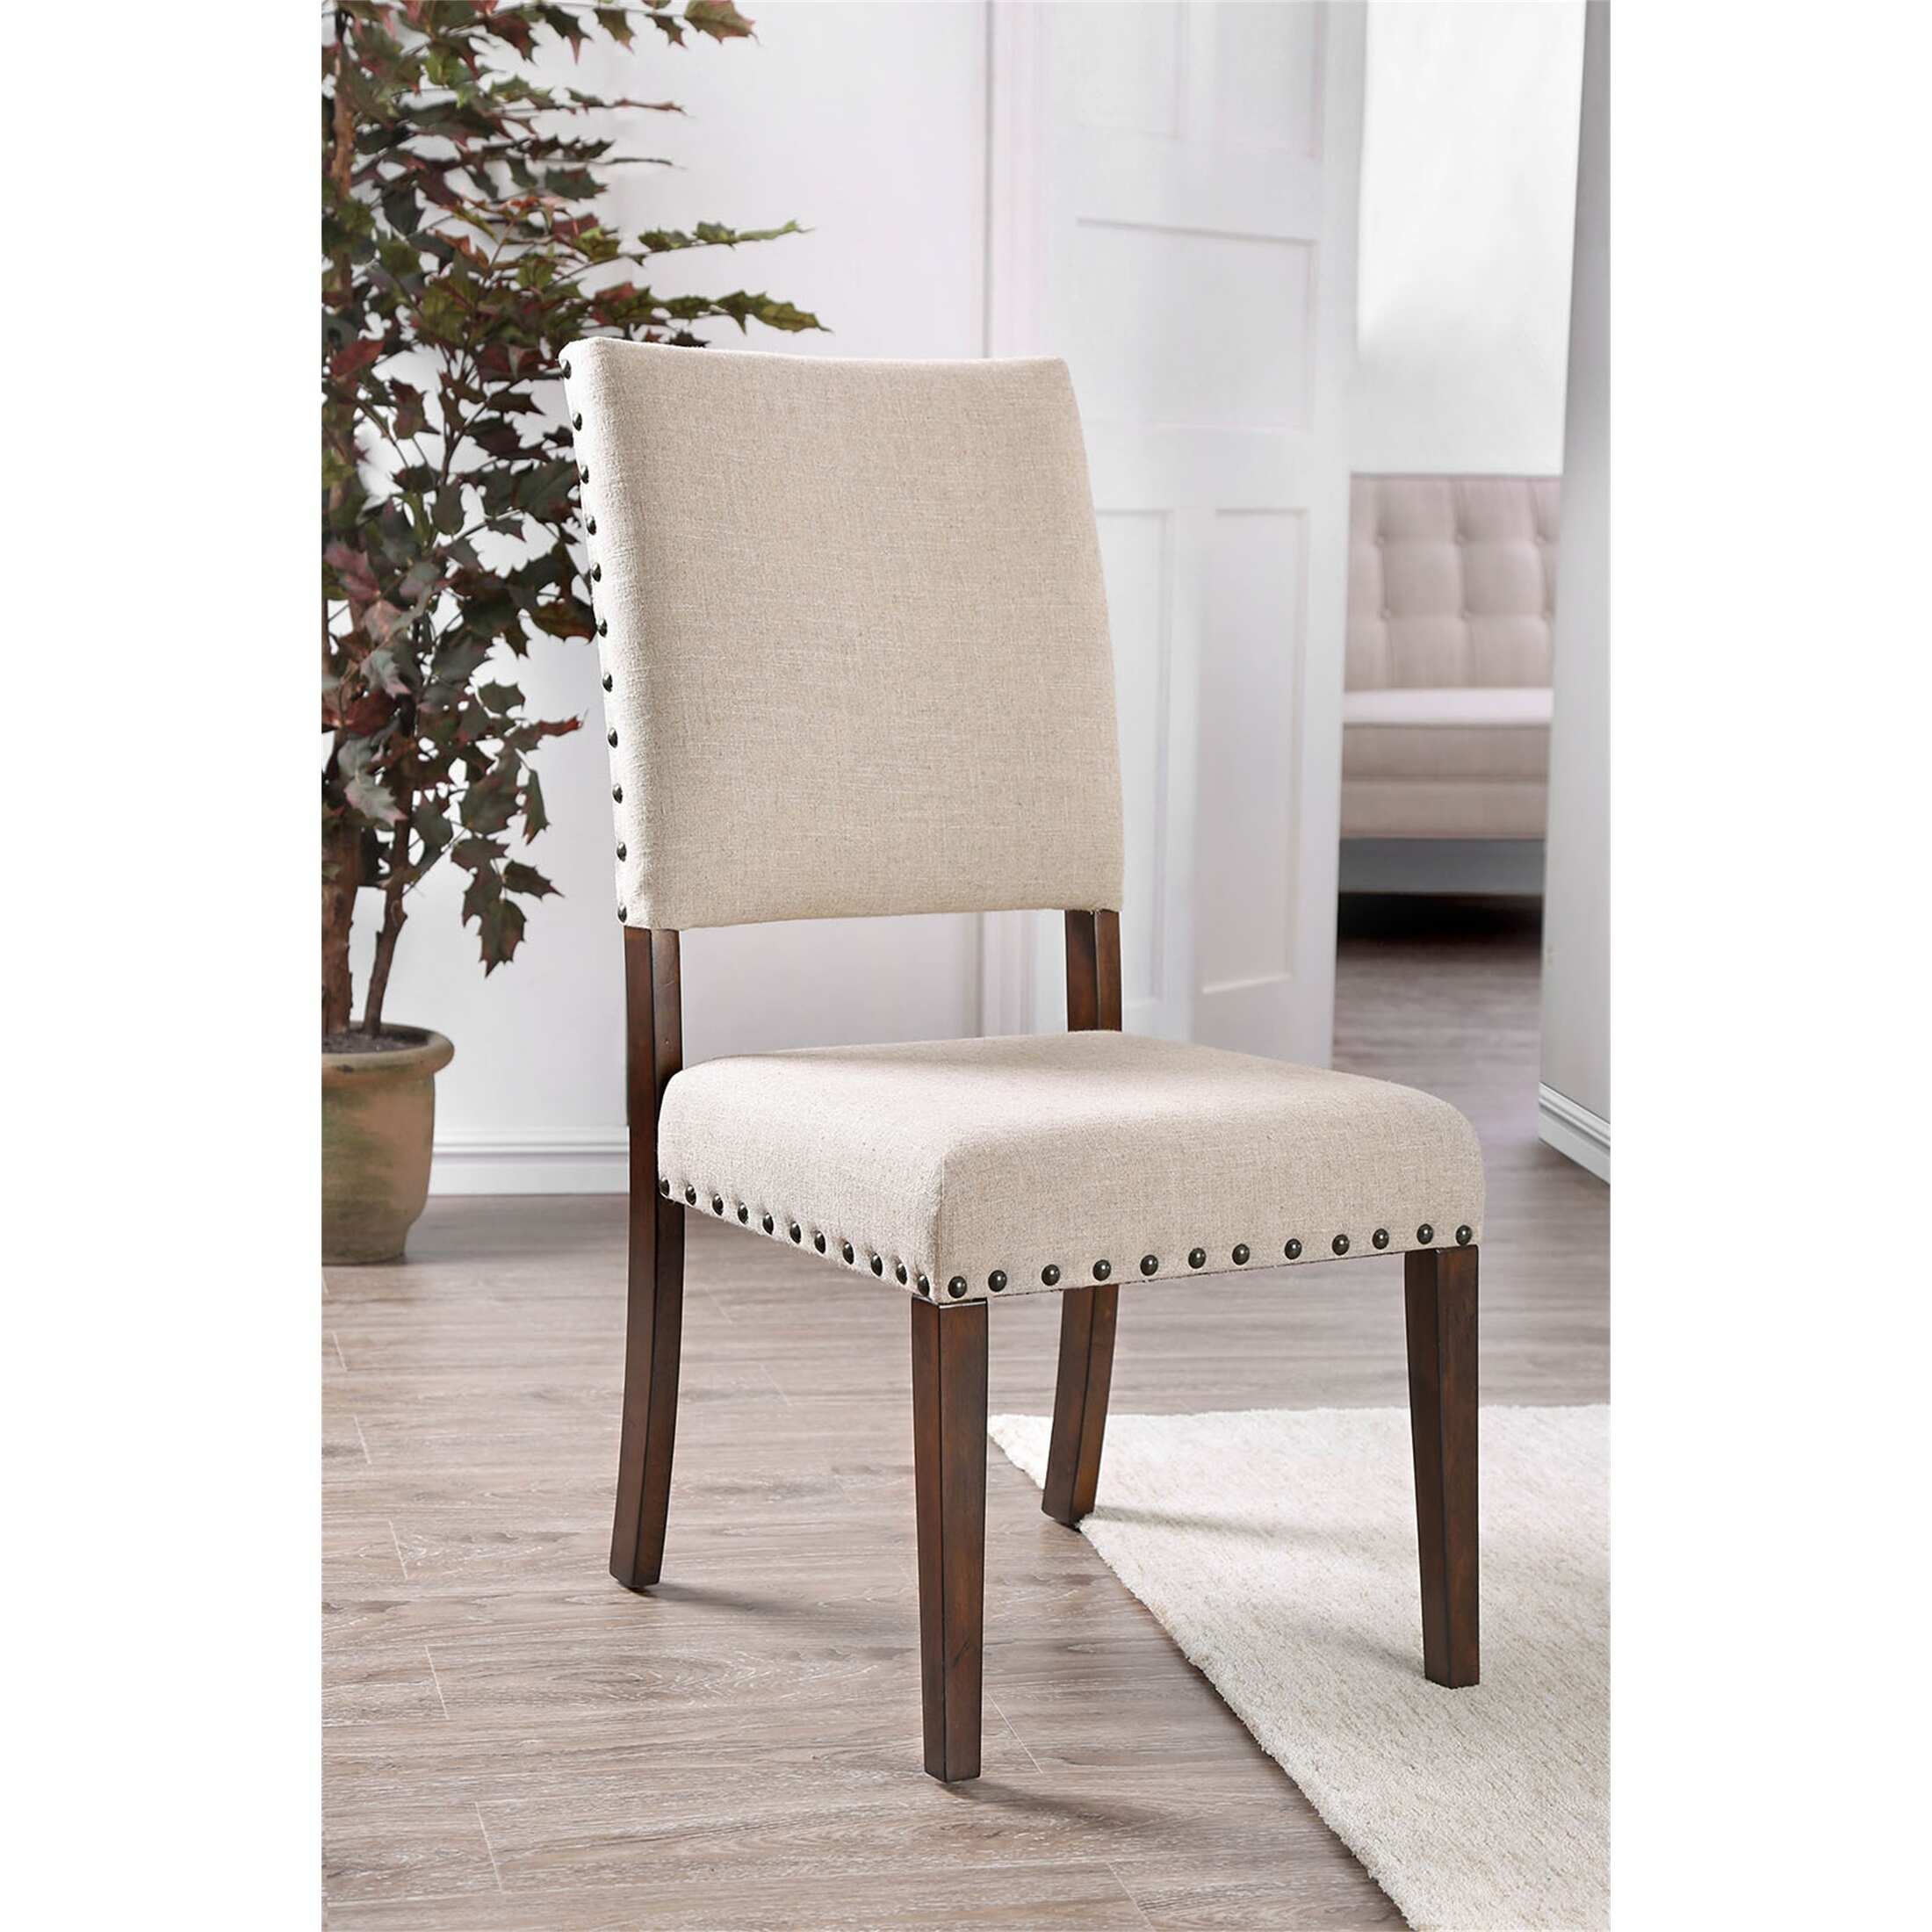 Rustic 2 pcs Dining Chairs Beige Fabric Upholstered Cushion